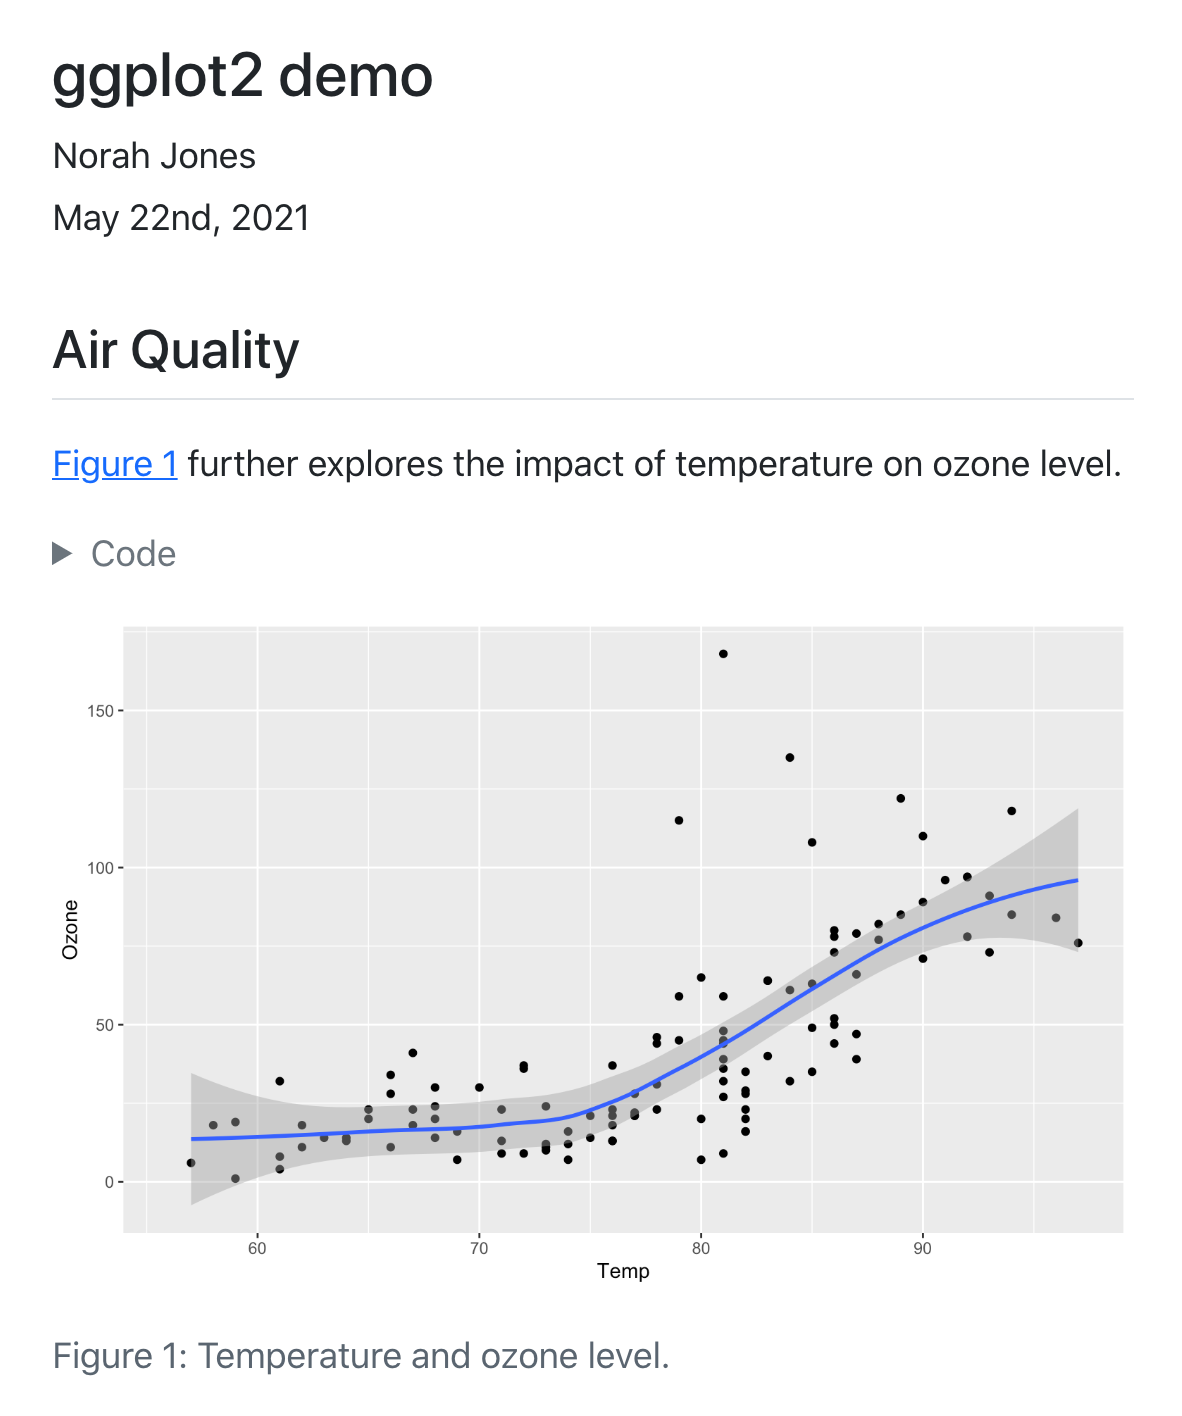 Example output with title (ggplot2 demo), author (Norah Jones), and date (5/22/2021). Below is a header reading Calidad del aire followed by body text (Figure 1 further explores the impact of temperature on ozone level.) with a toggleable code field, and figure with caption Figure 1 Temperatura y nivel de ozono.